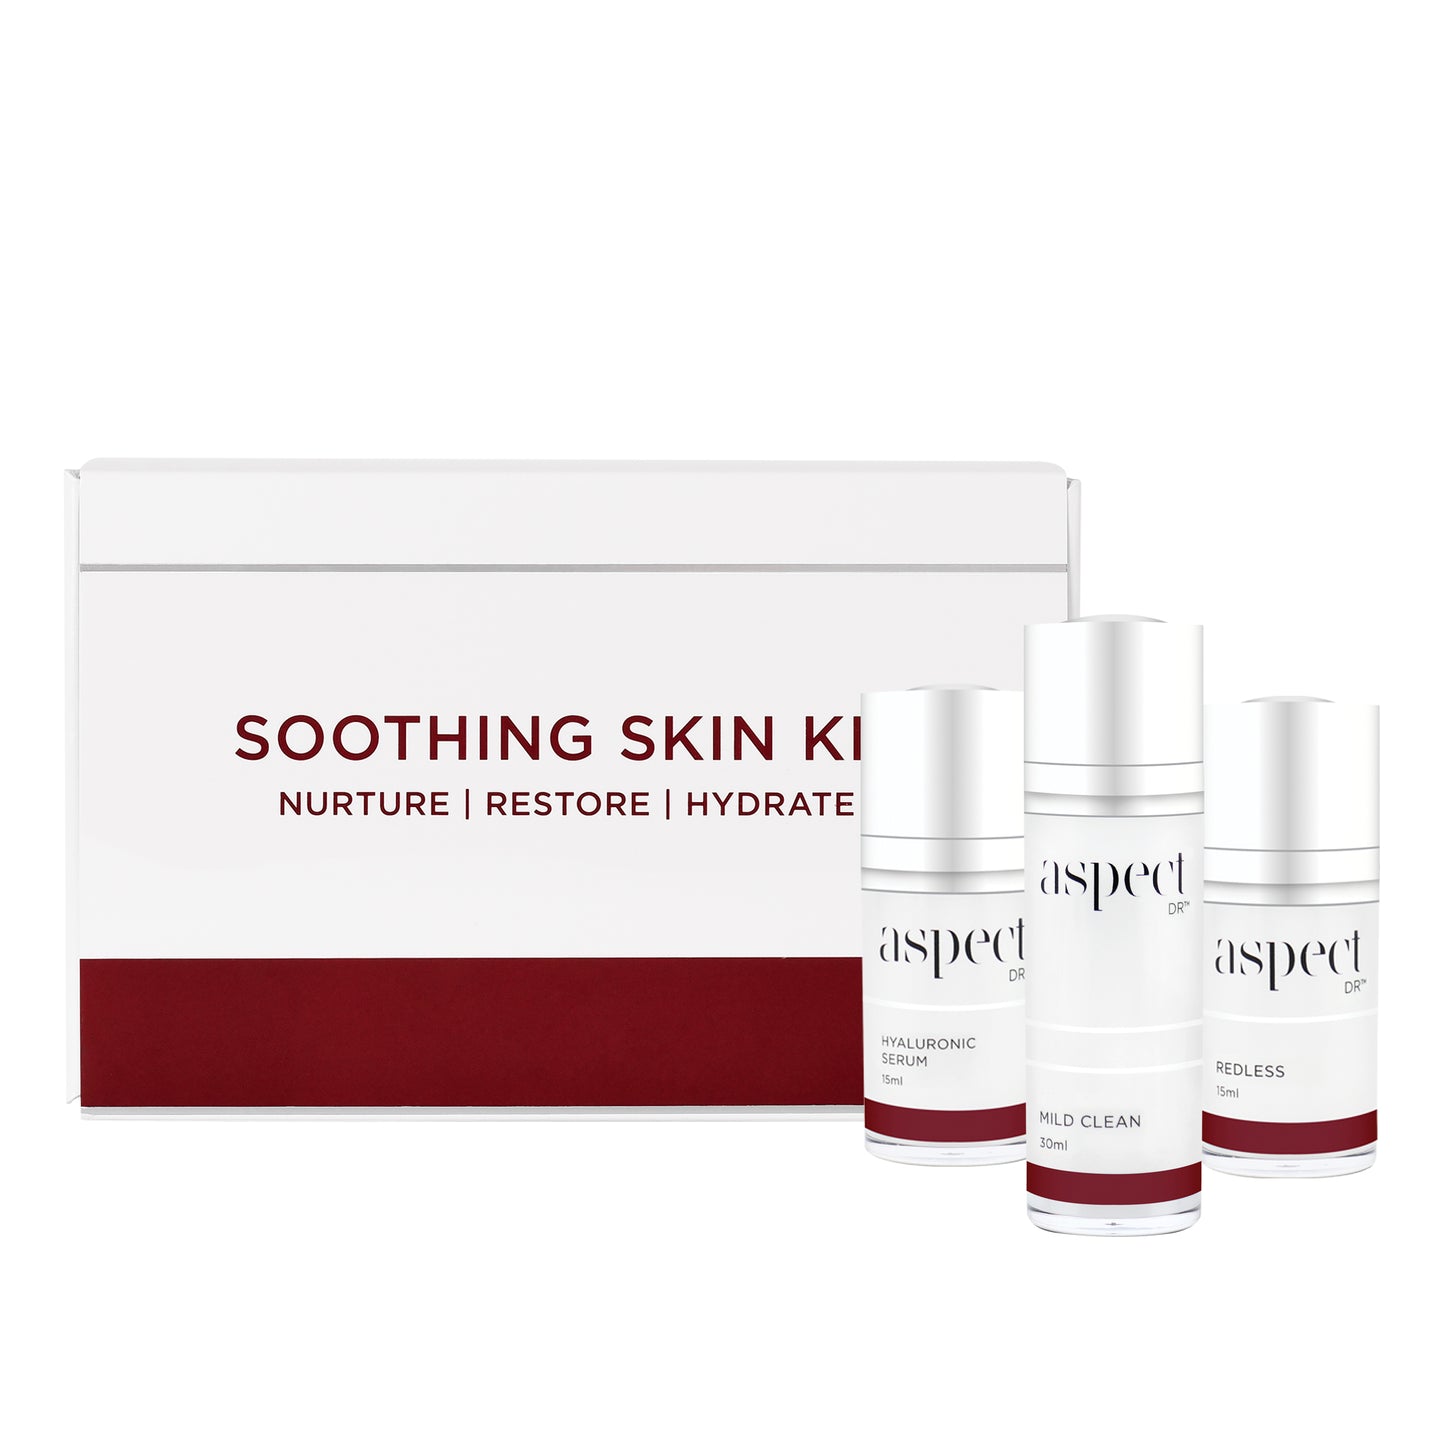 ASPECT-DR Soothing Kit